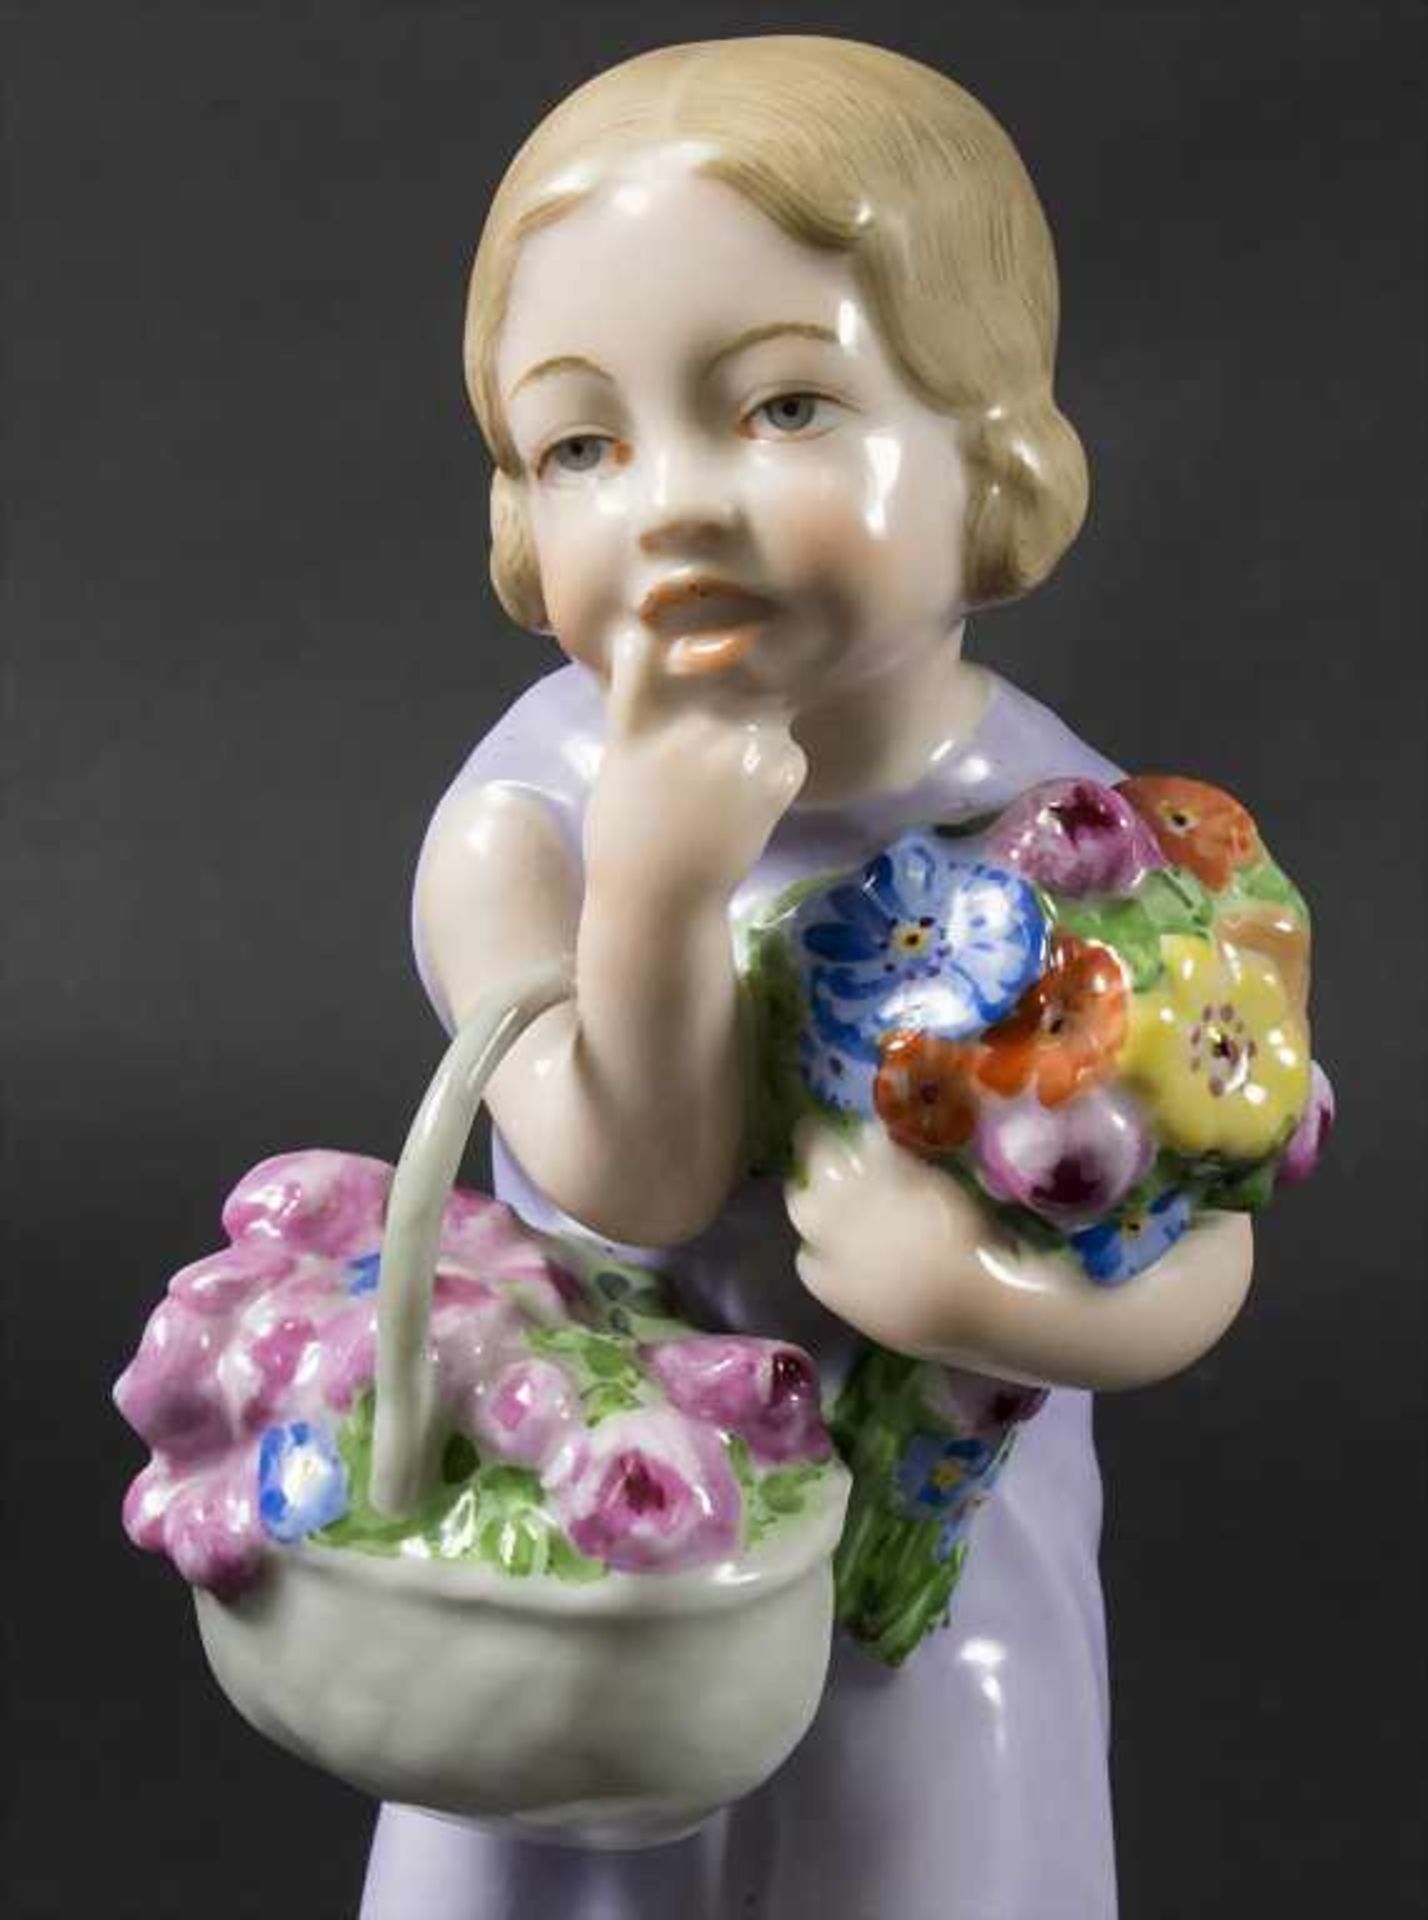 Seltene Figur eines Mädchens mit Blumenkorb / A rare figure of a girl with flowers, Rosenthal, Selb, - Image 2 of 6